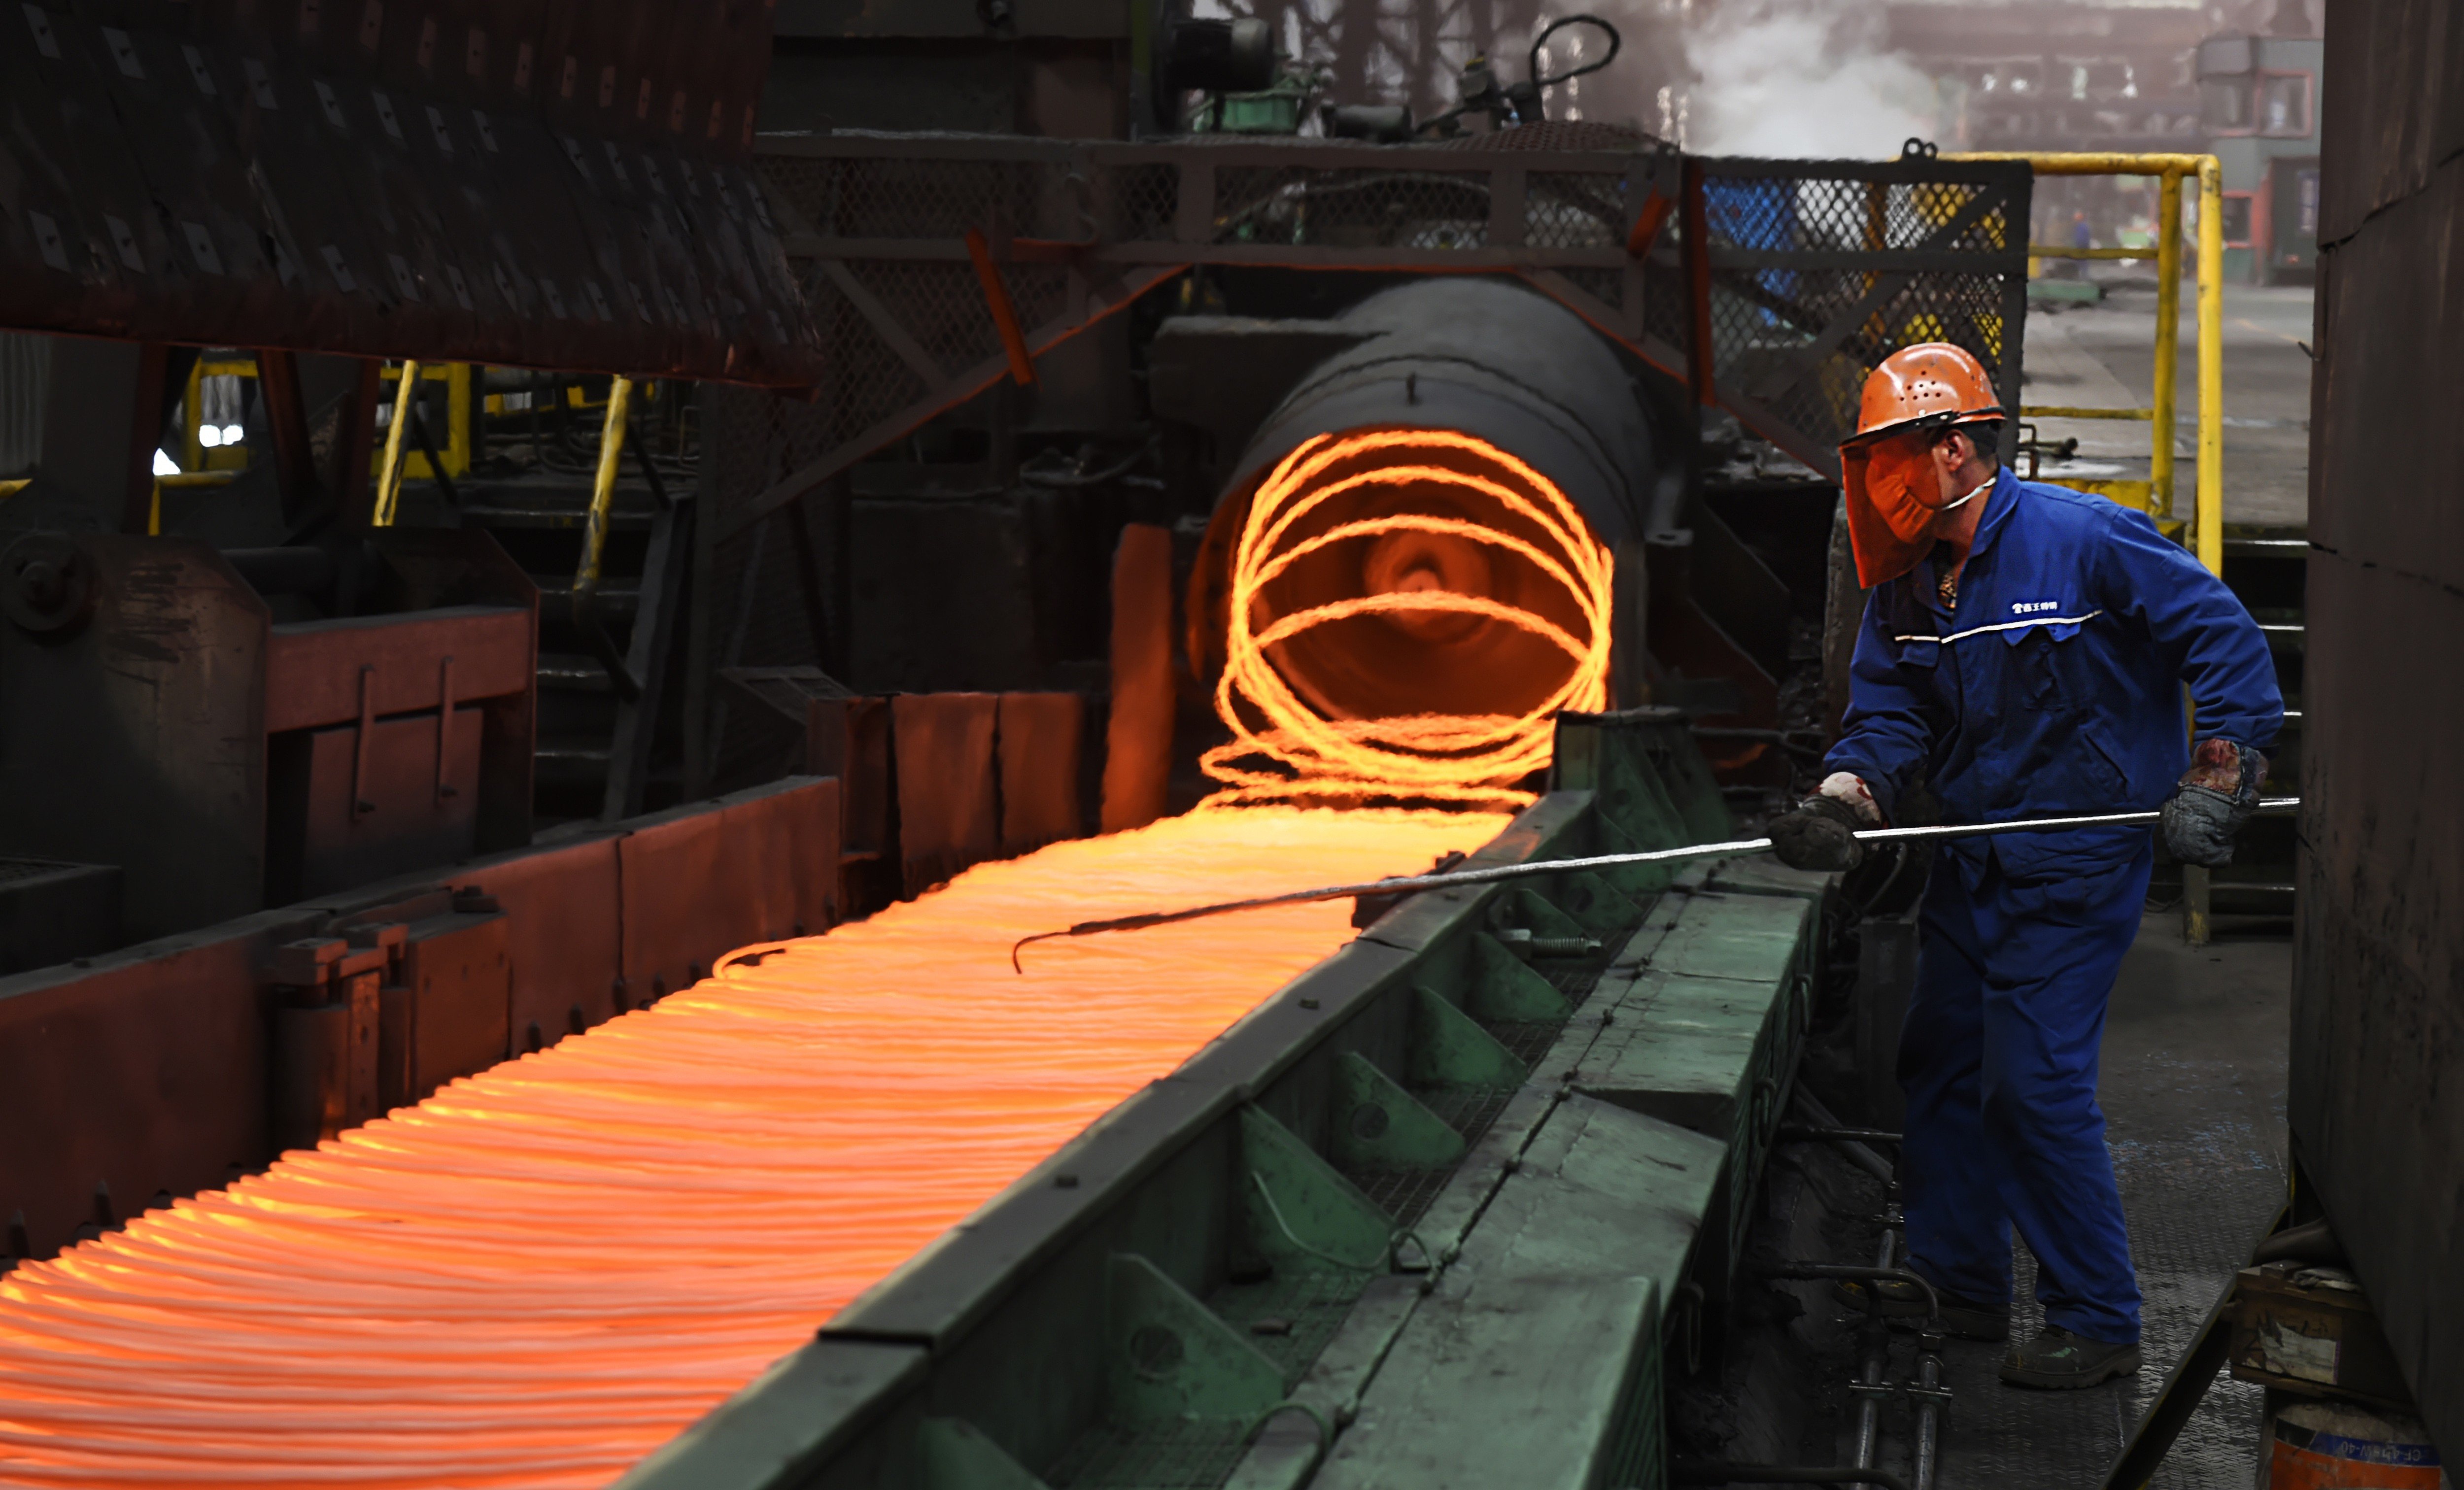 A worker manipulates coils of steel at Xiwang Special Steel in Zouping County in eastern China's Shandong province in May 2018. Photo: Associated Press